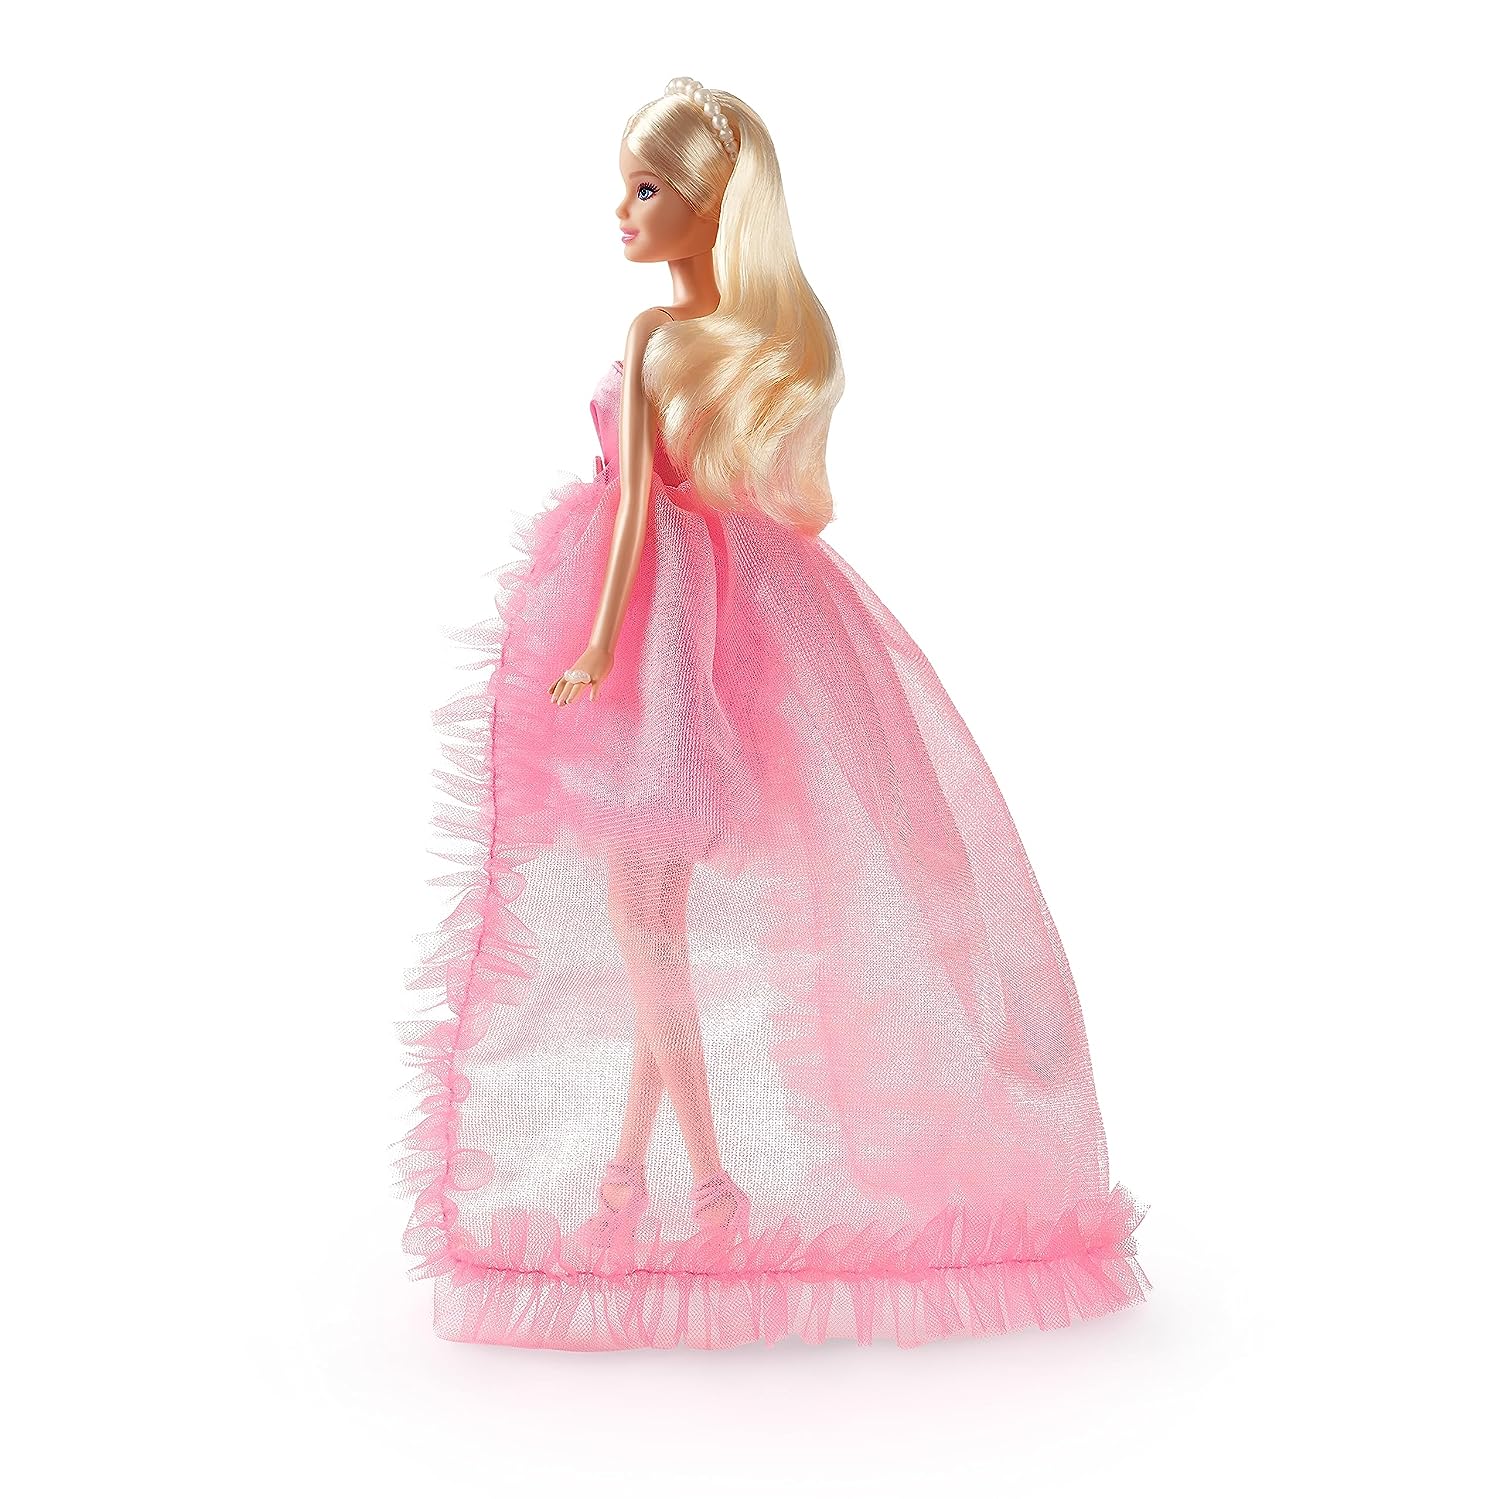 Barbie Birthday Wishes Blonde Doll in Pink Satin and Tulle Dress for Kids Ages 6+